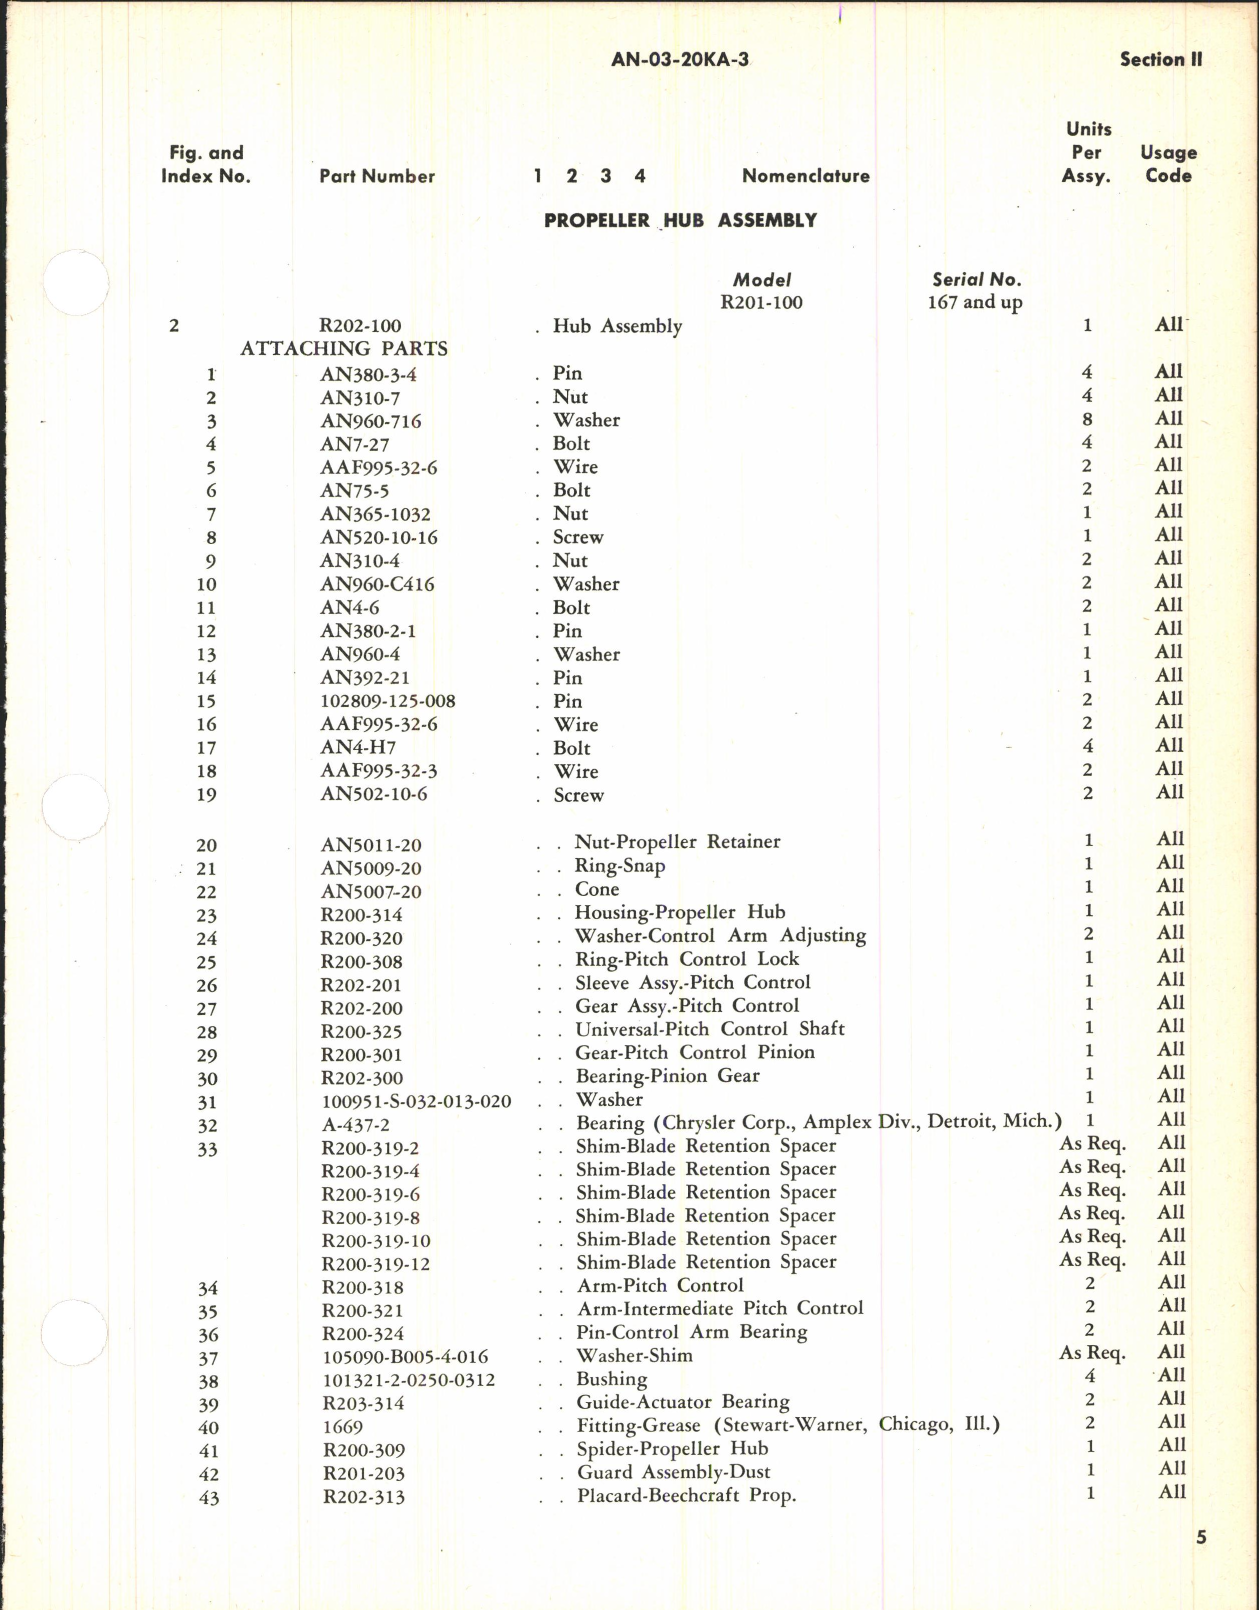 Sample page 7 from AirCorps Library document: Parts Catalog For Model R202-101 Manual Control Propeller